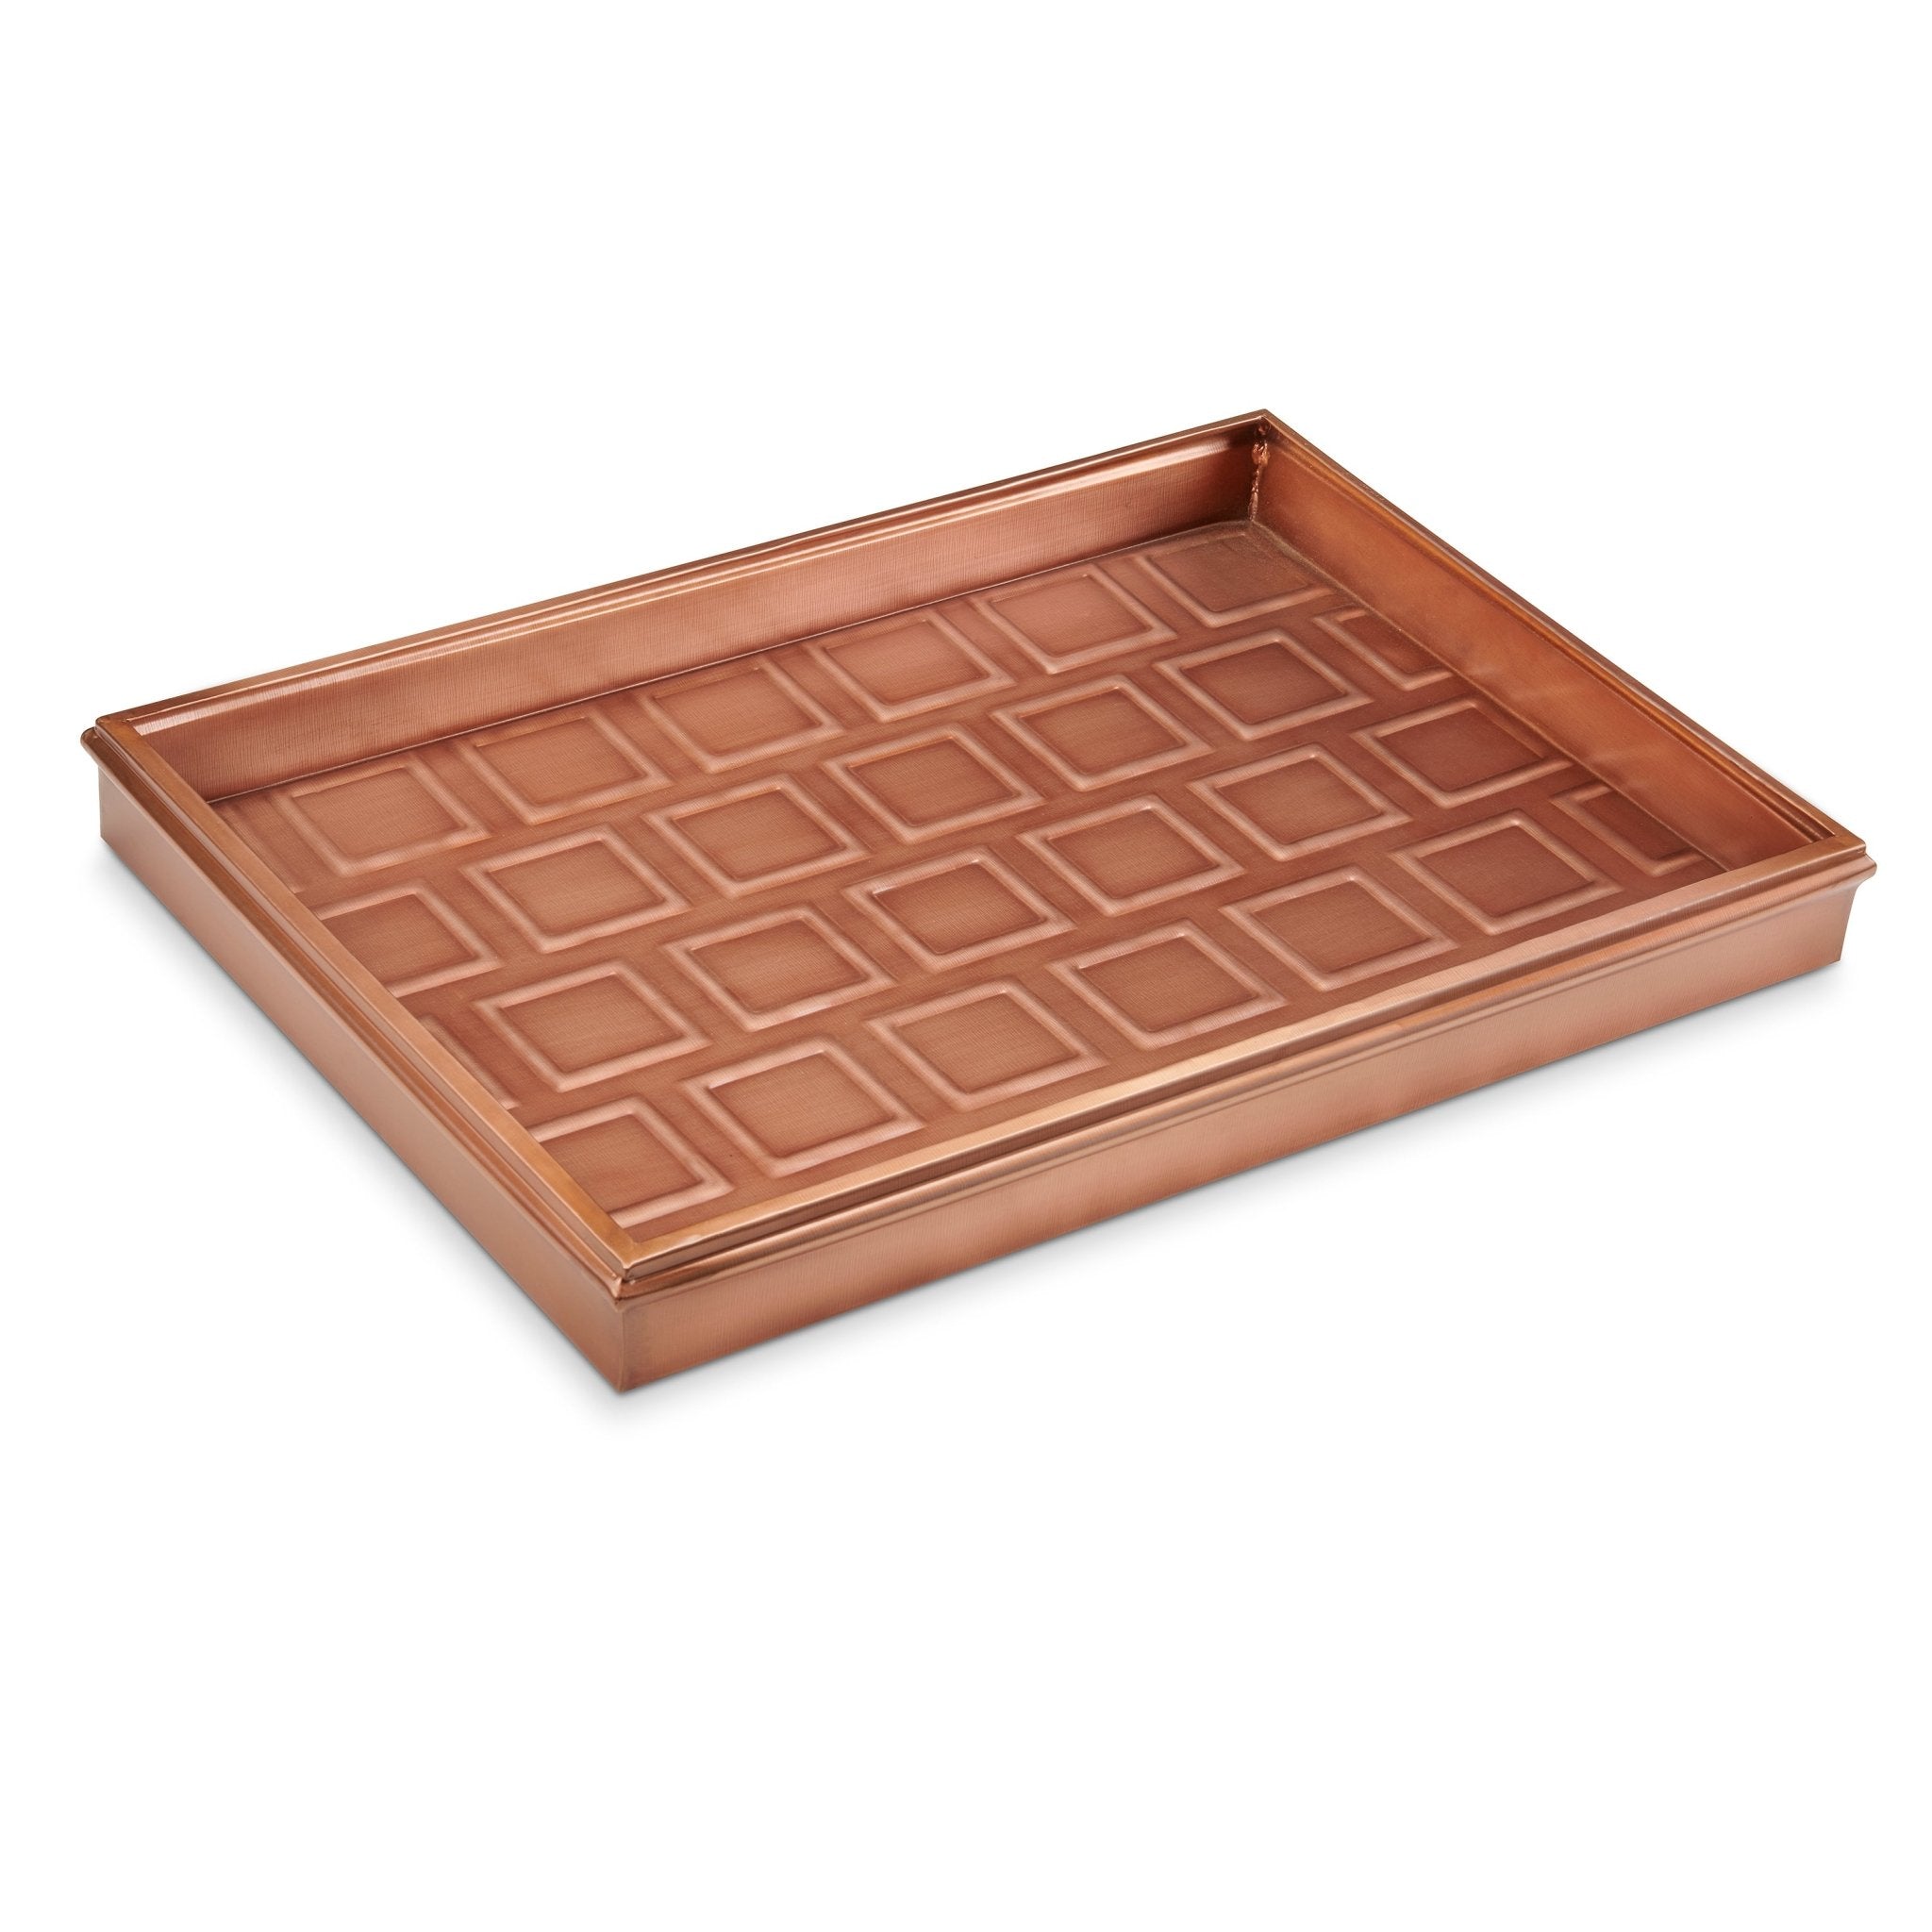 20" Squares Multi-Purpose Boot Tray - Good Directions